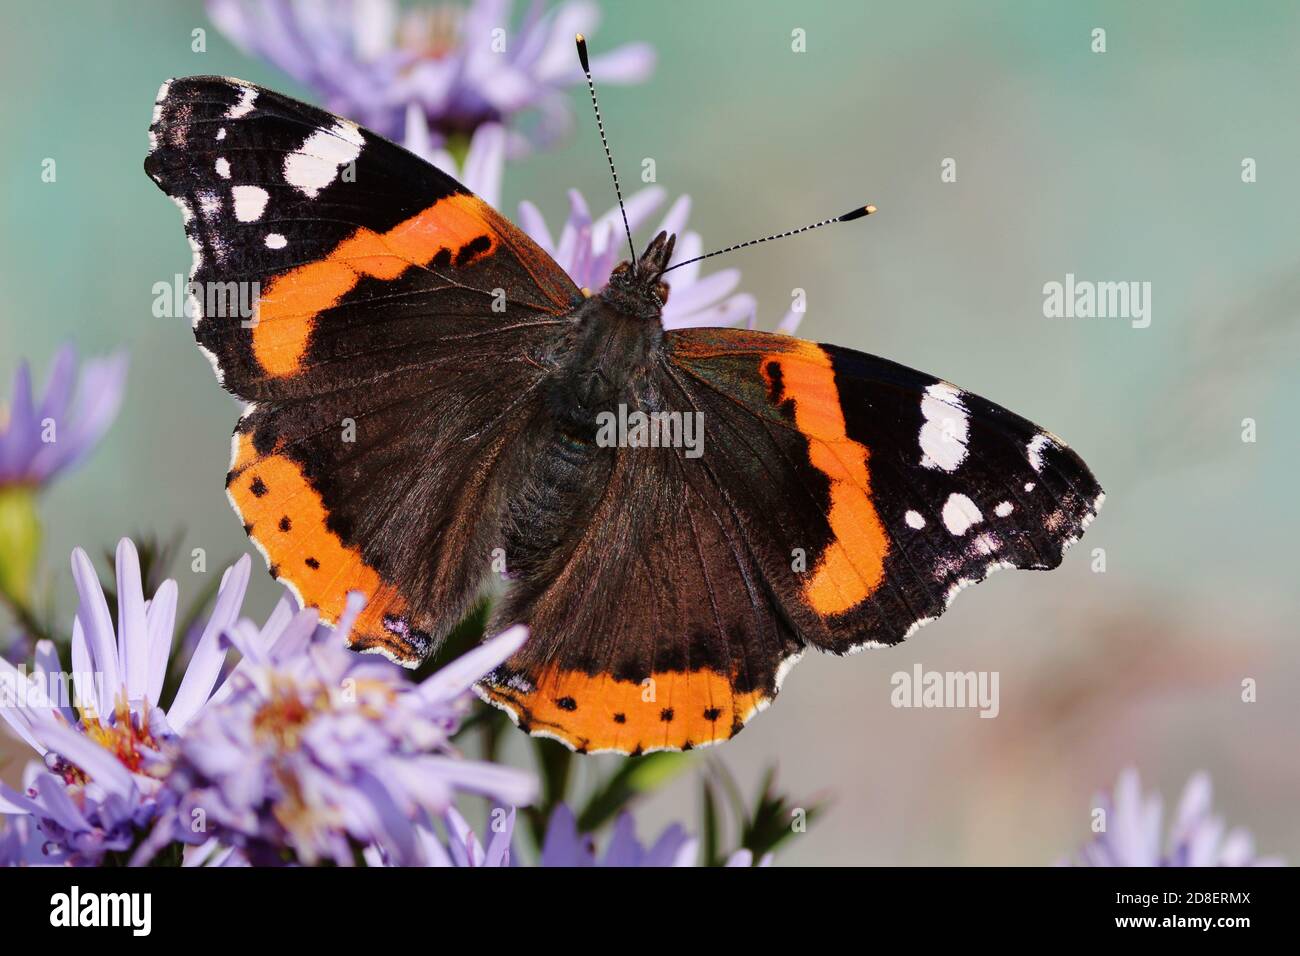 Colorful background butterfly and flowers. Northern Red Admiral butterfly is sitting on purple flowers of Symphyotrichum novi-belgii. Stock Photo